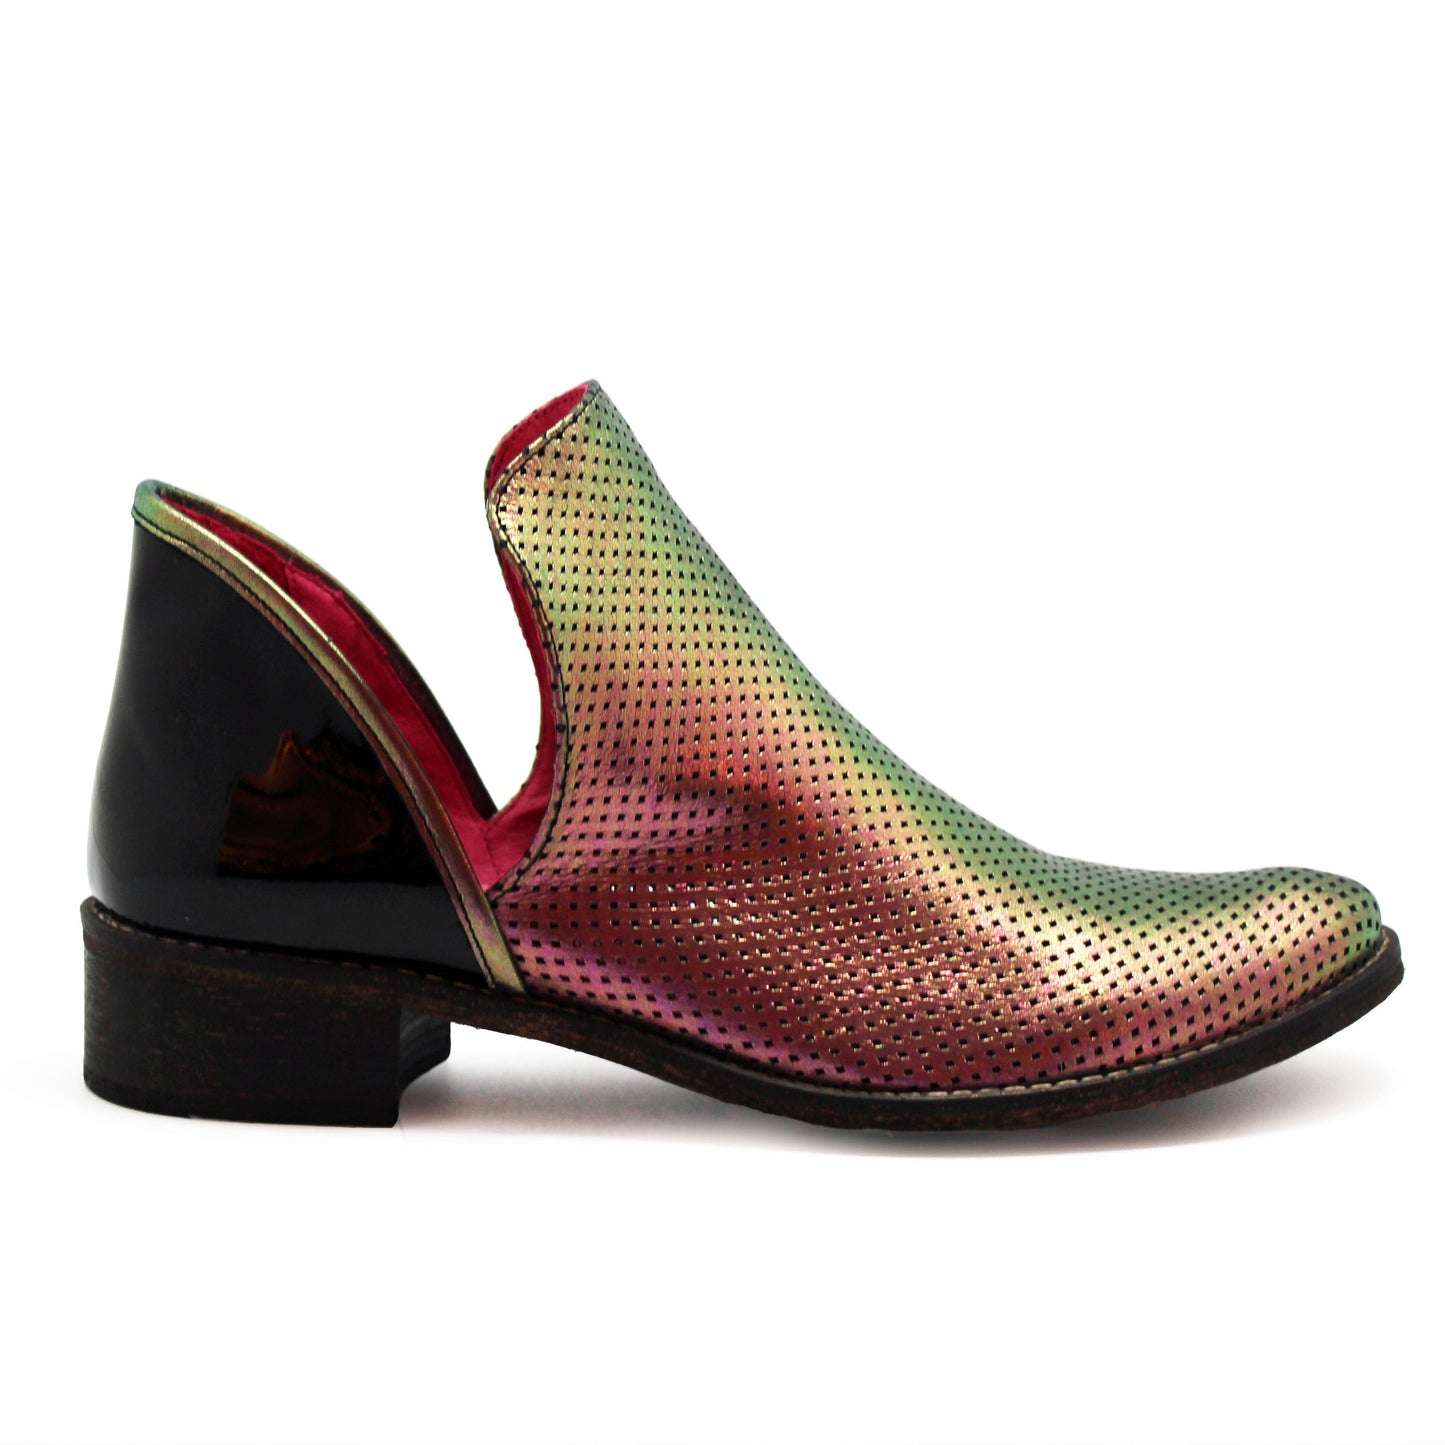 Zippette - Iridescent ankle boot